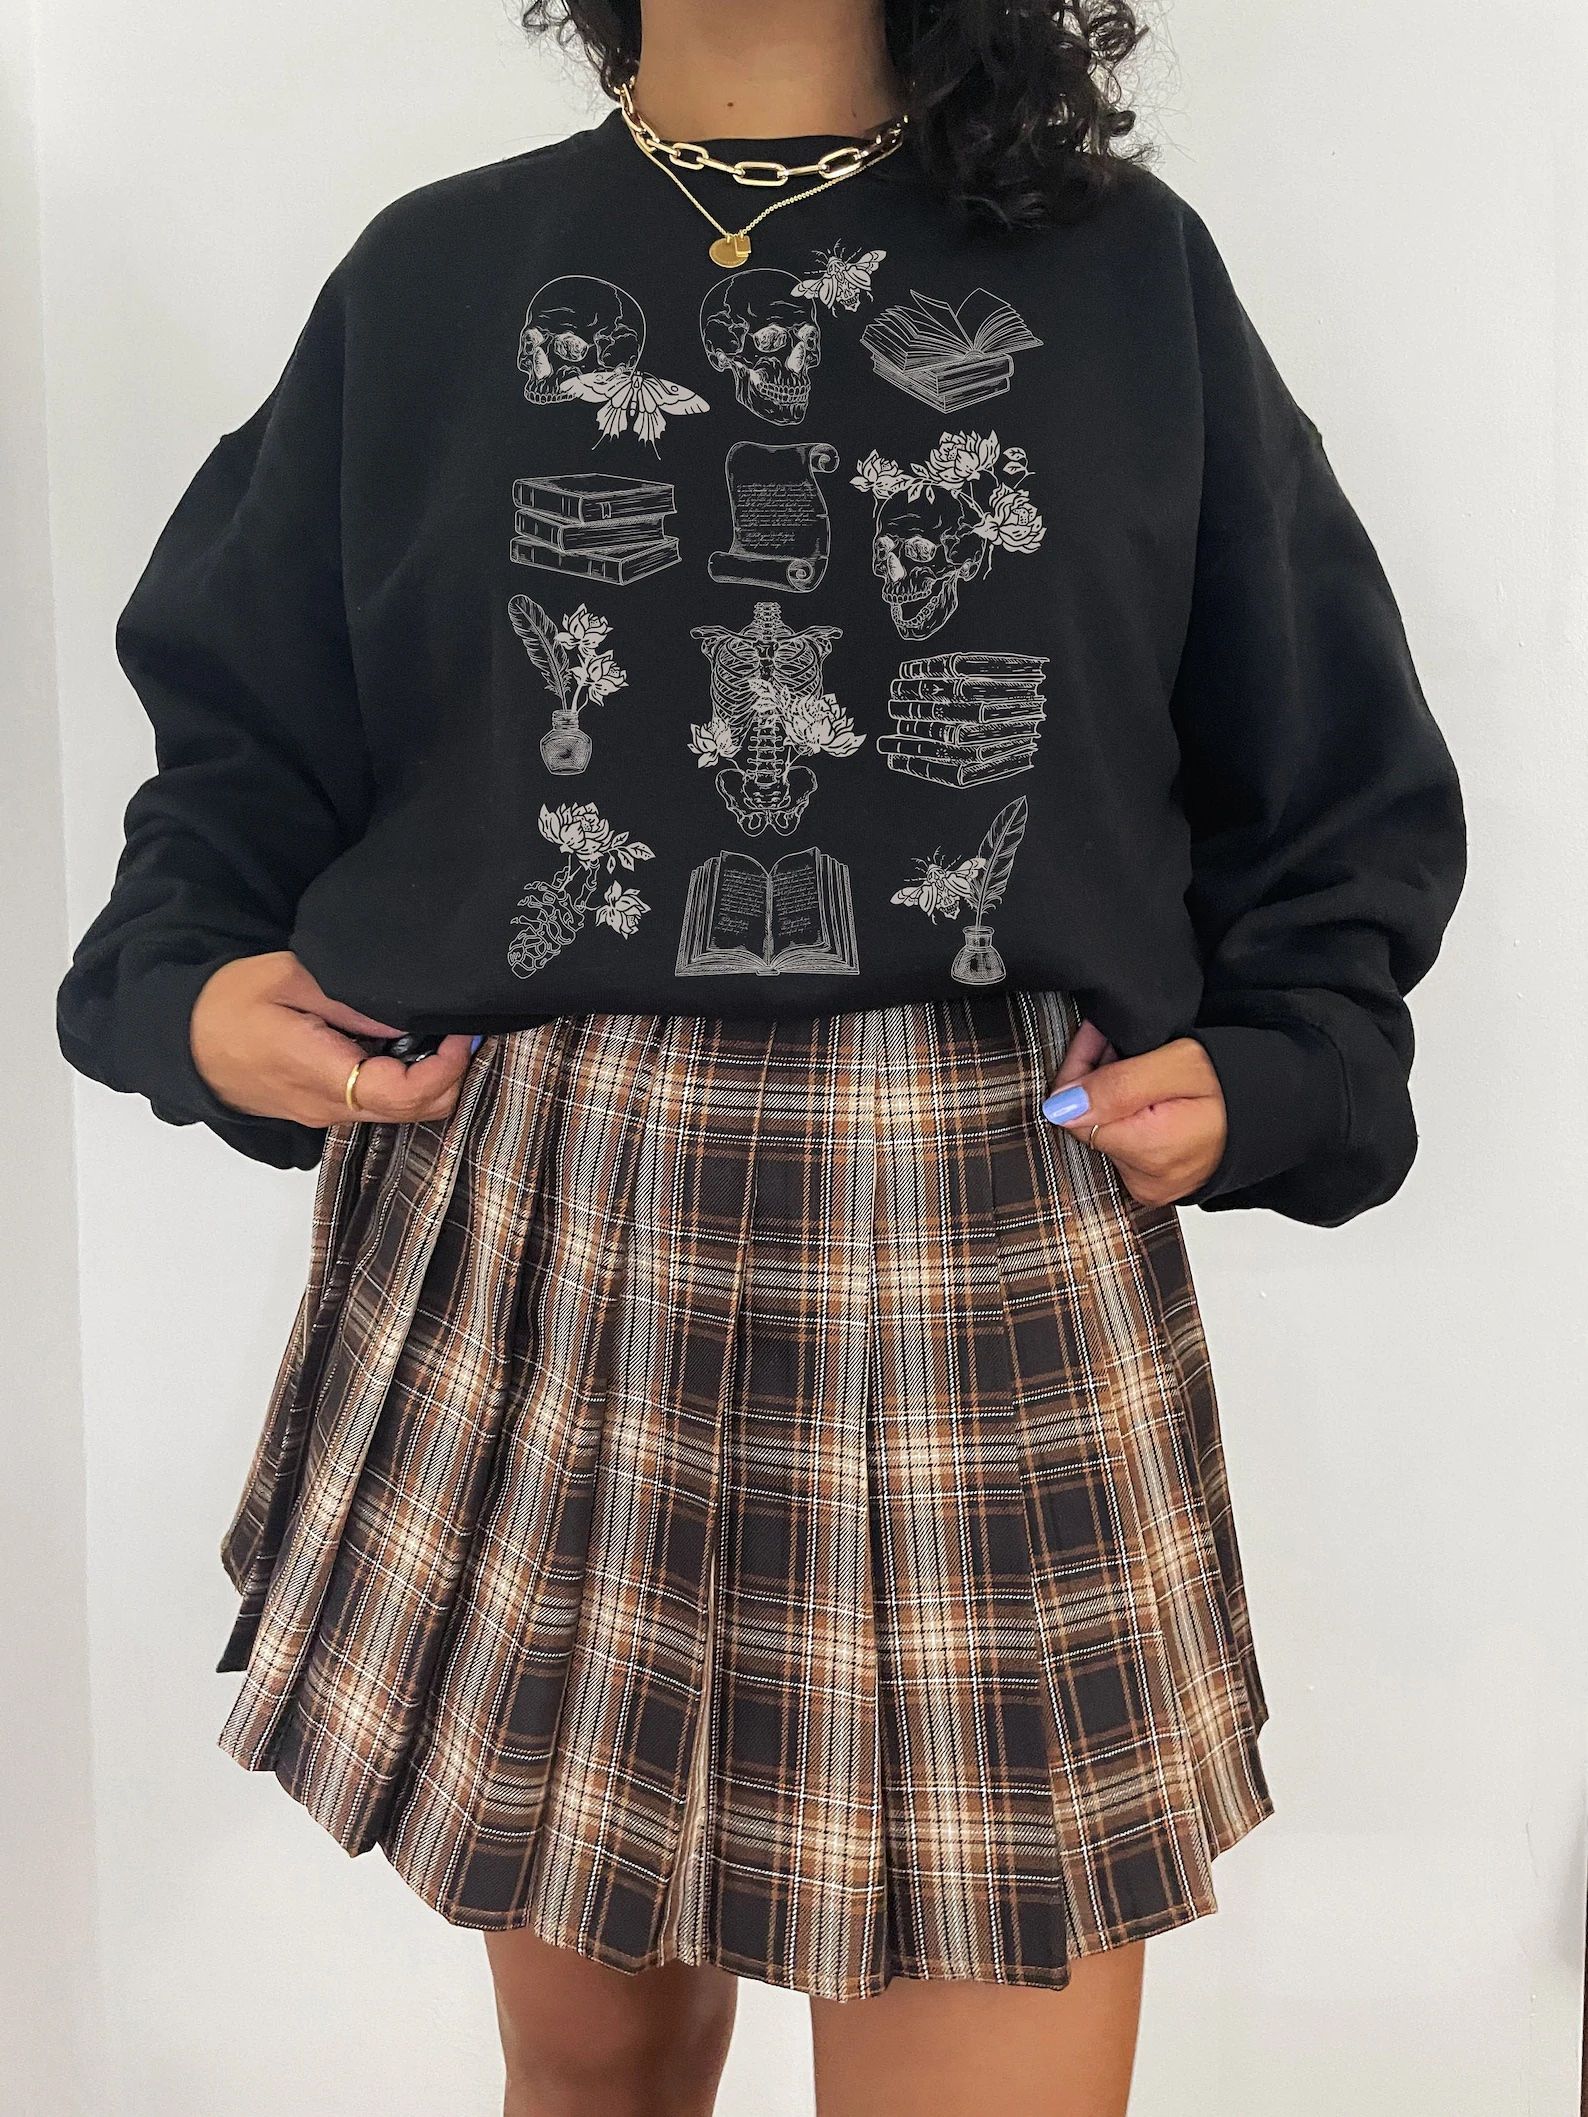 Photo of woman wearing a black sweatshirt with line drawings of skulls, books, flowers, and other imagery associated with the subgenre of dark academia.